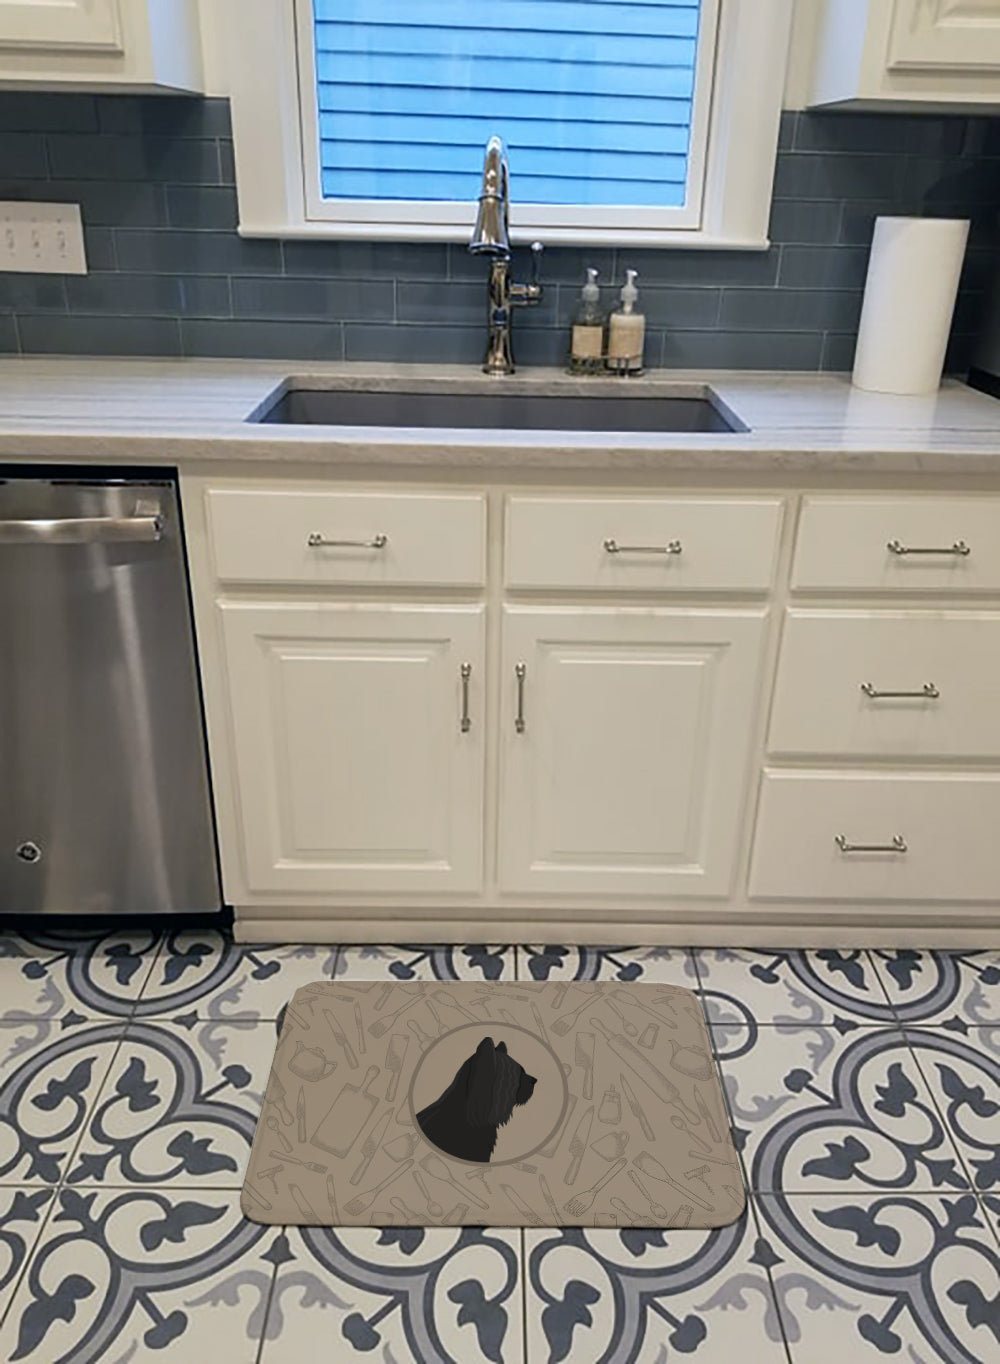 Skye Terrier In the Kitchen Machine Washable Memory Foam Mat CK2211RUG - the-store.com